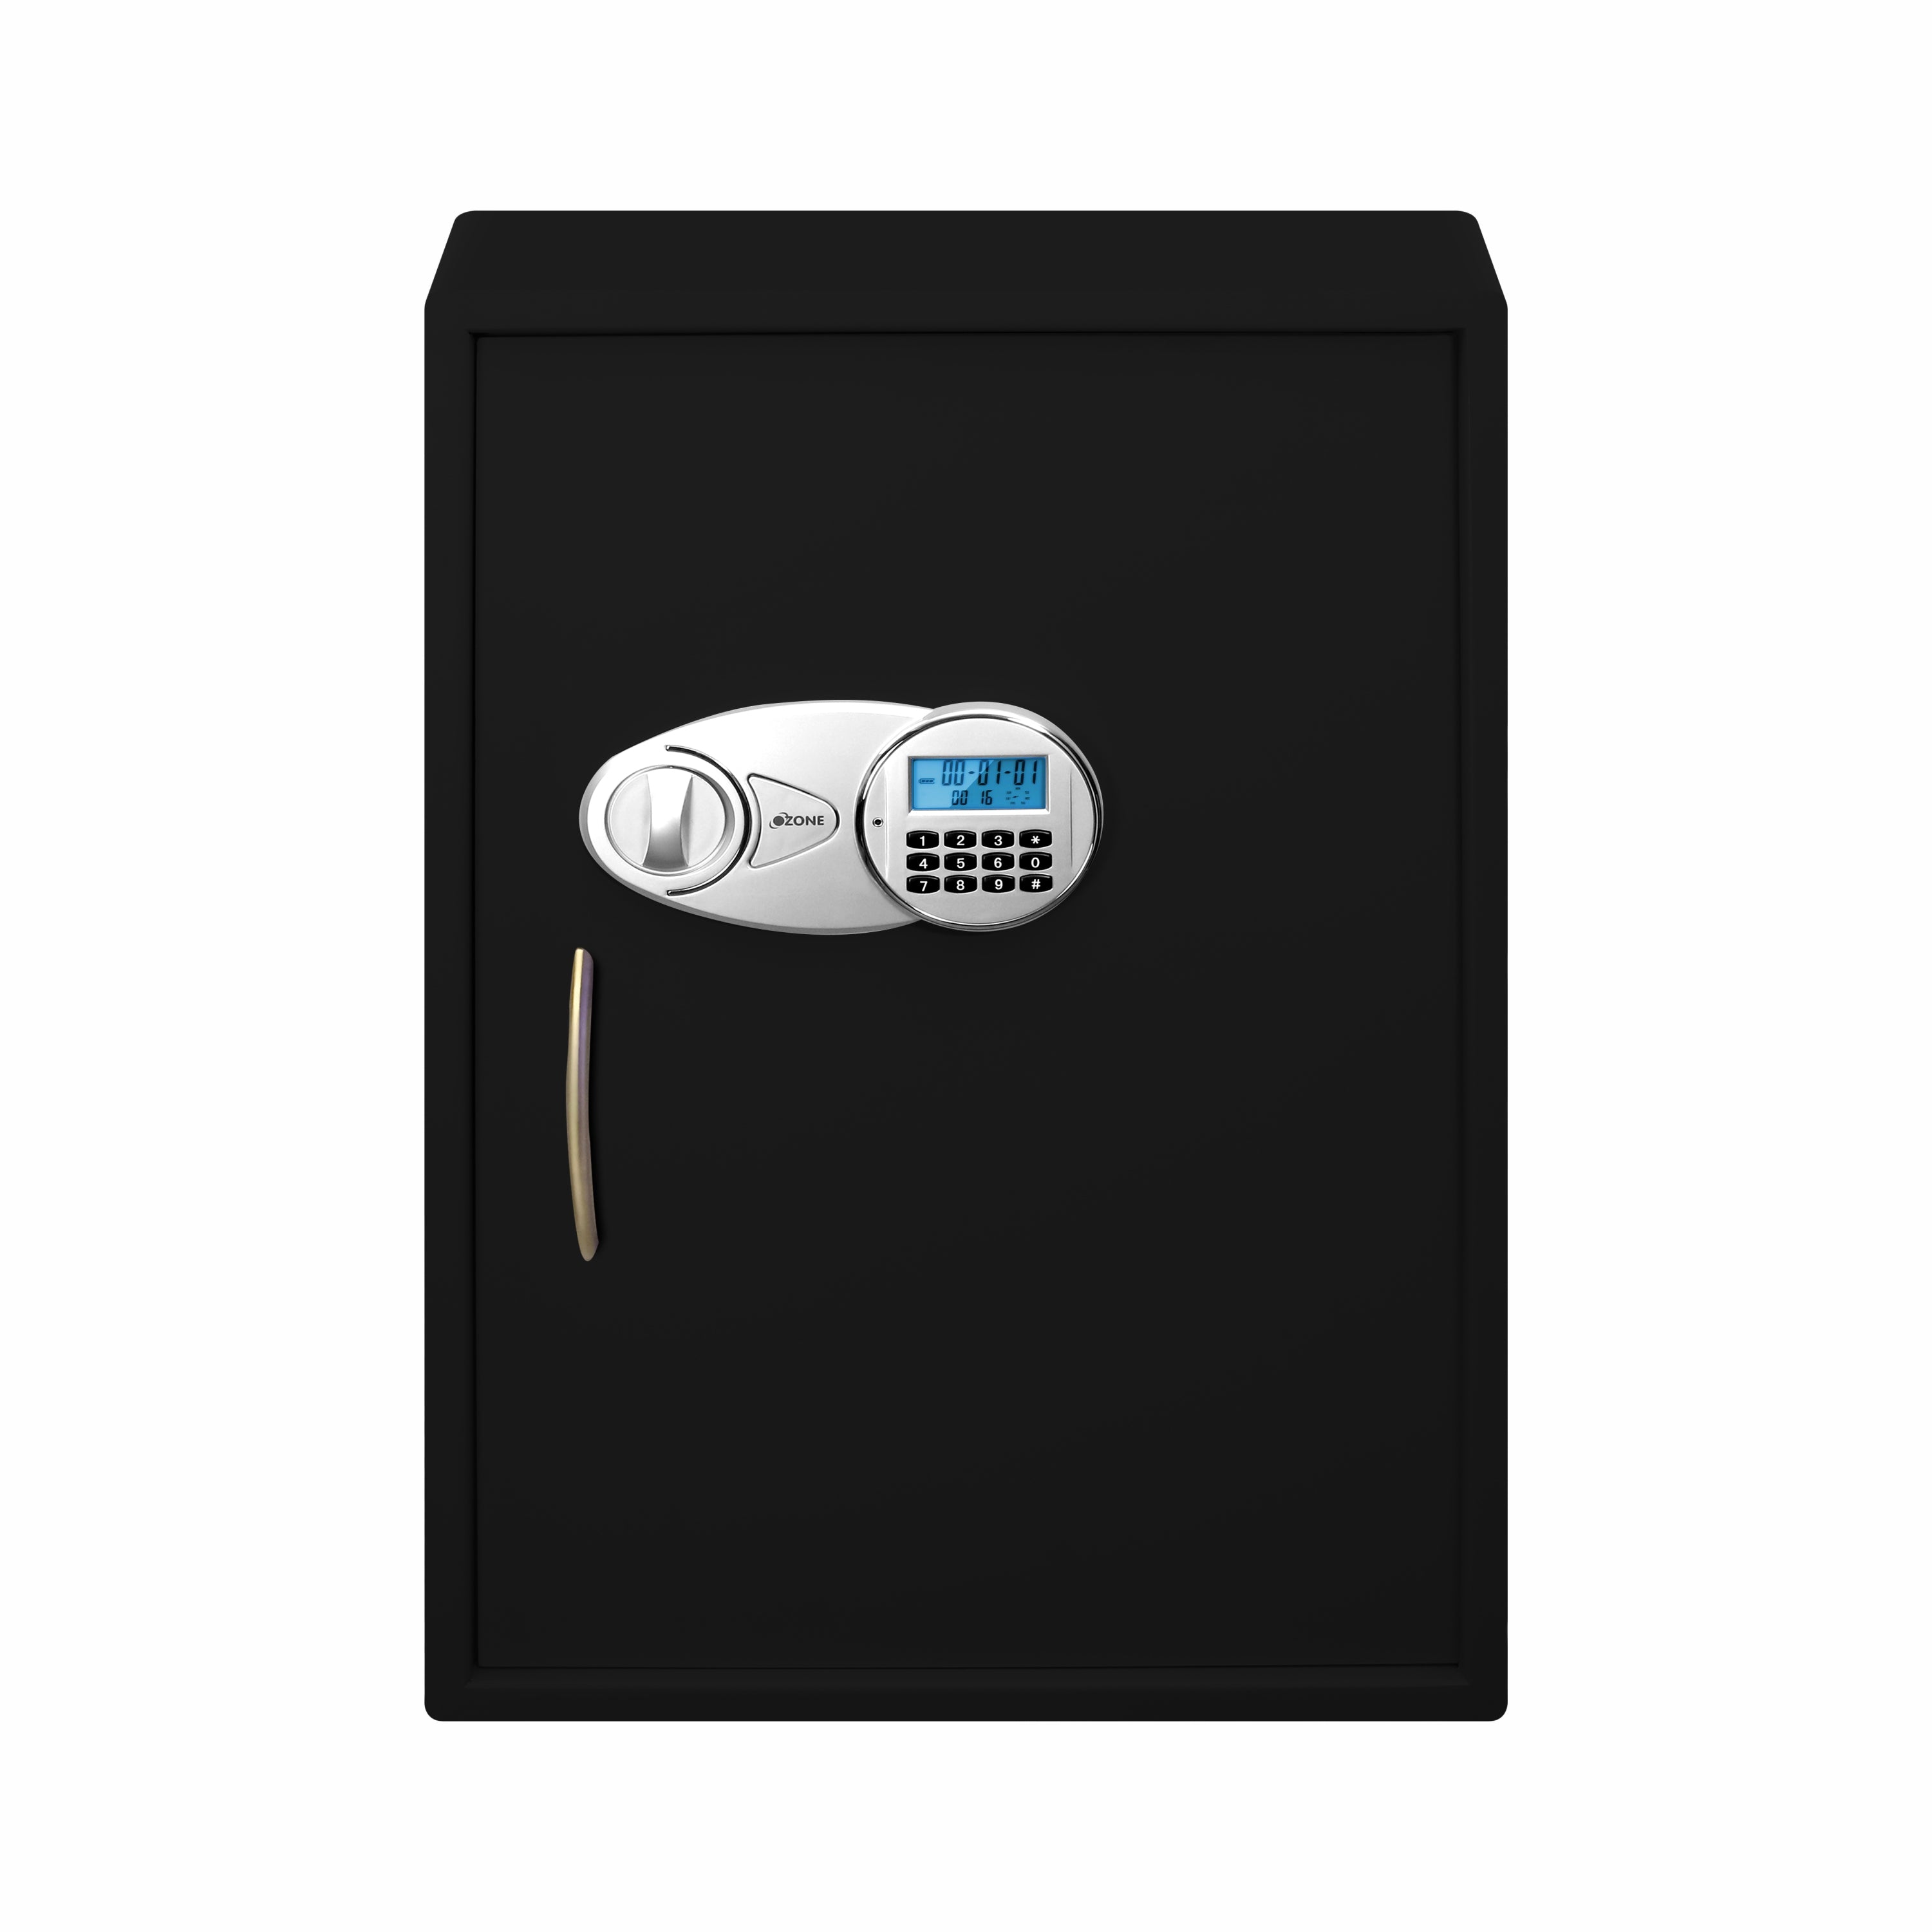 Ozone Multi-purpose Safe for Homes & Retail Spaces | 2-way Access | Password & Emergency Key (Black & Grey, 95.4 Ltrs.)